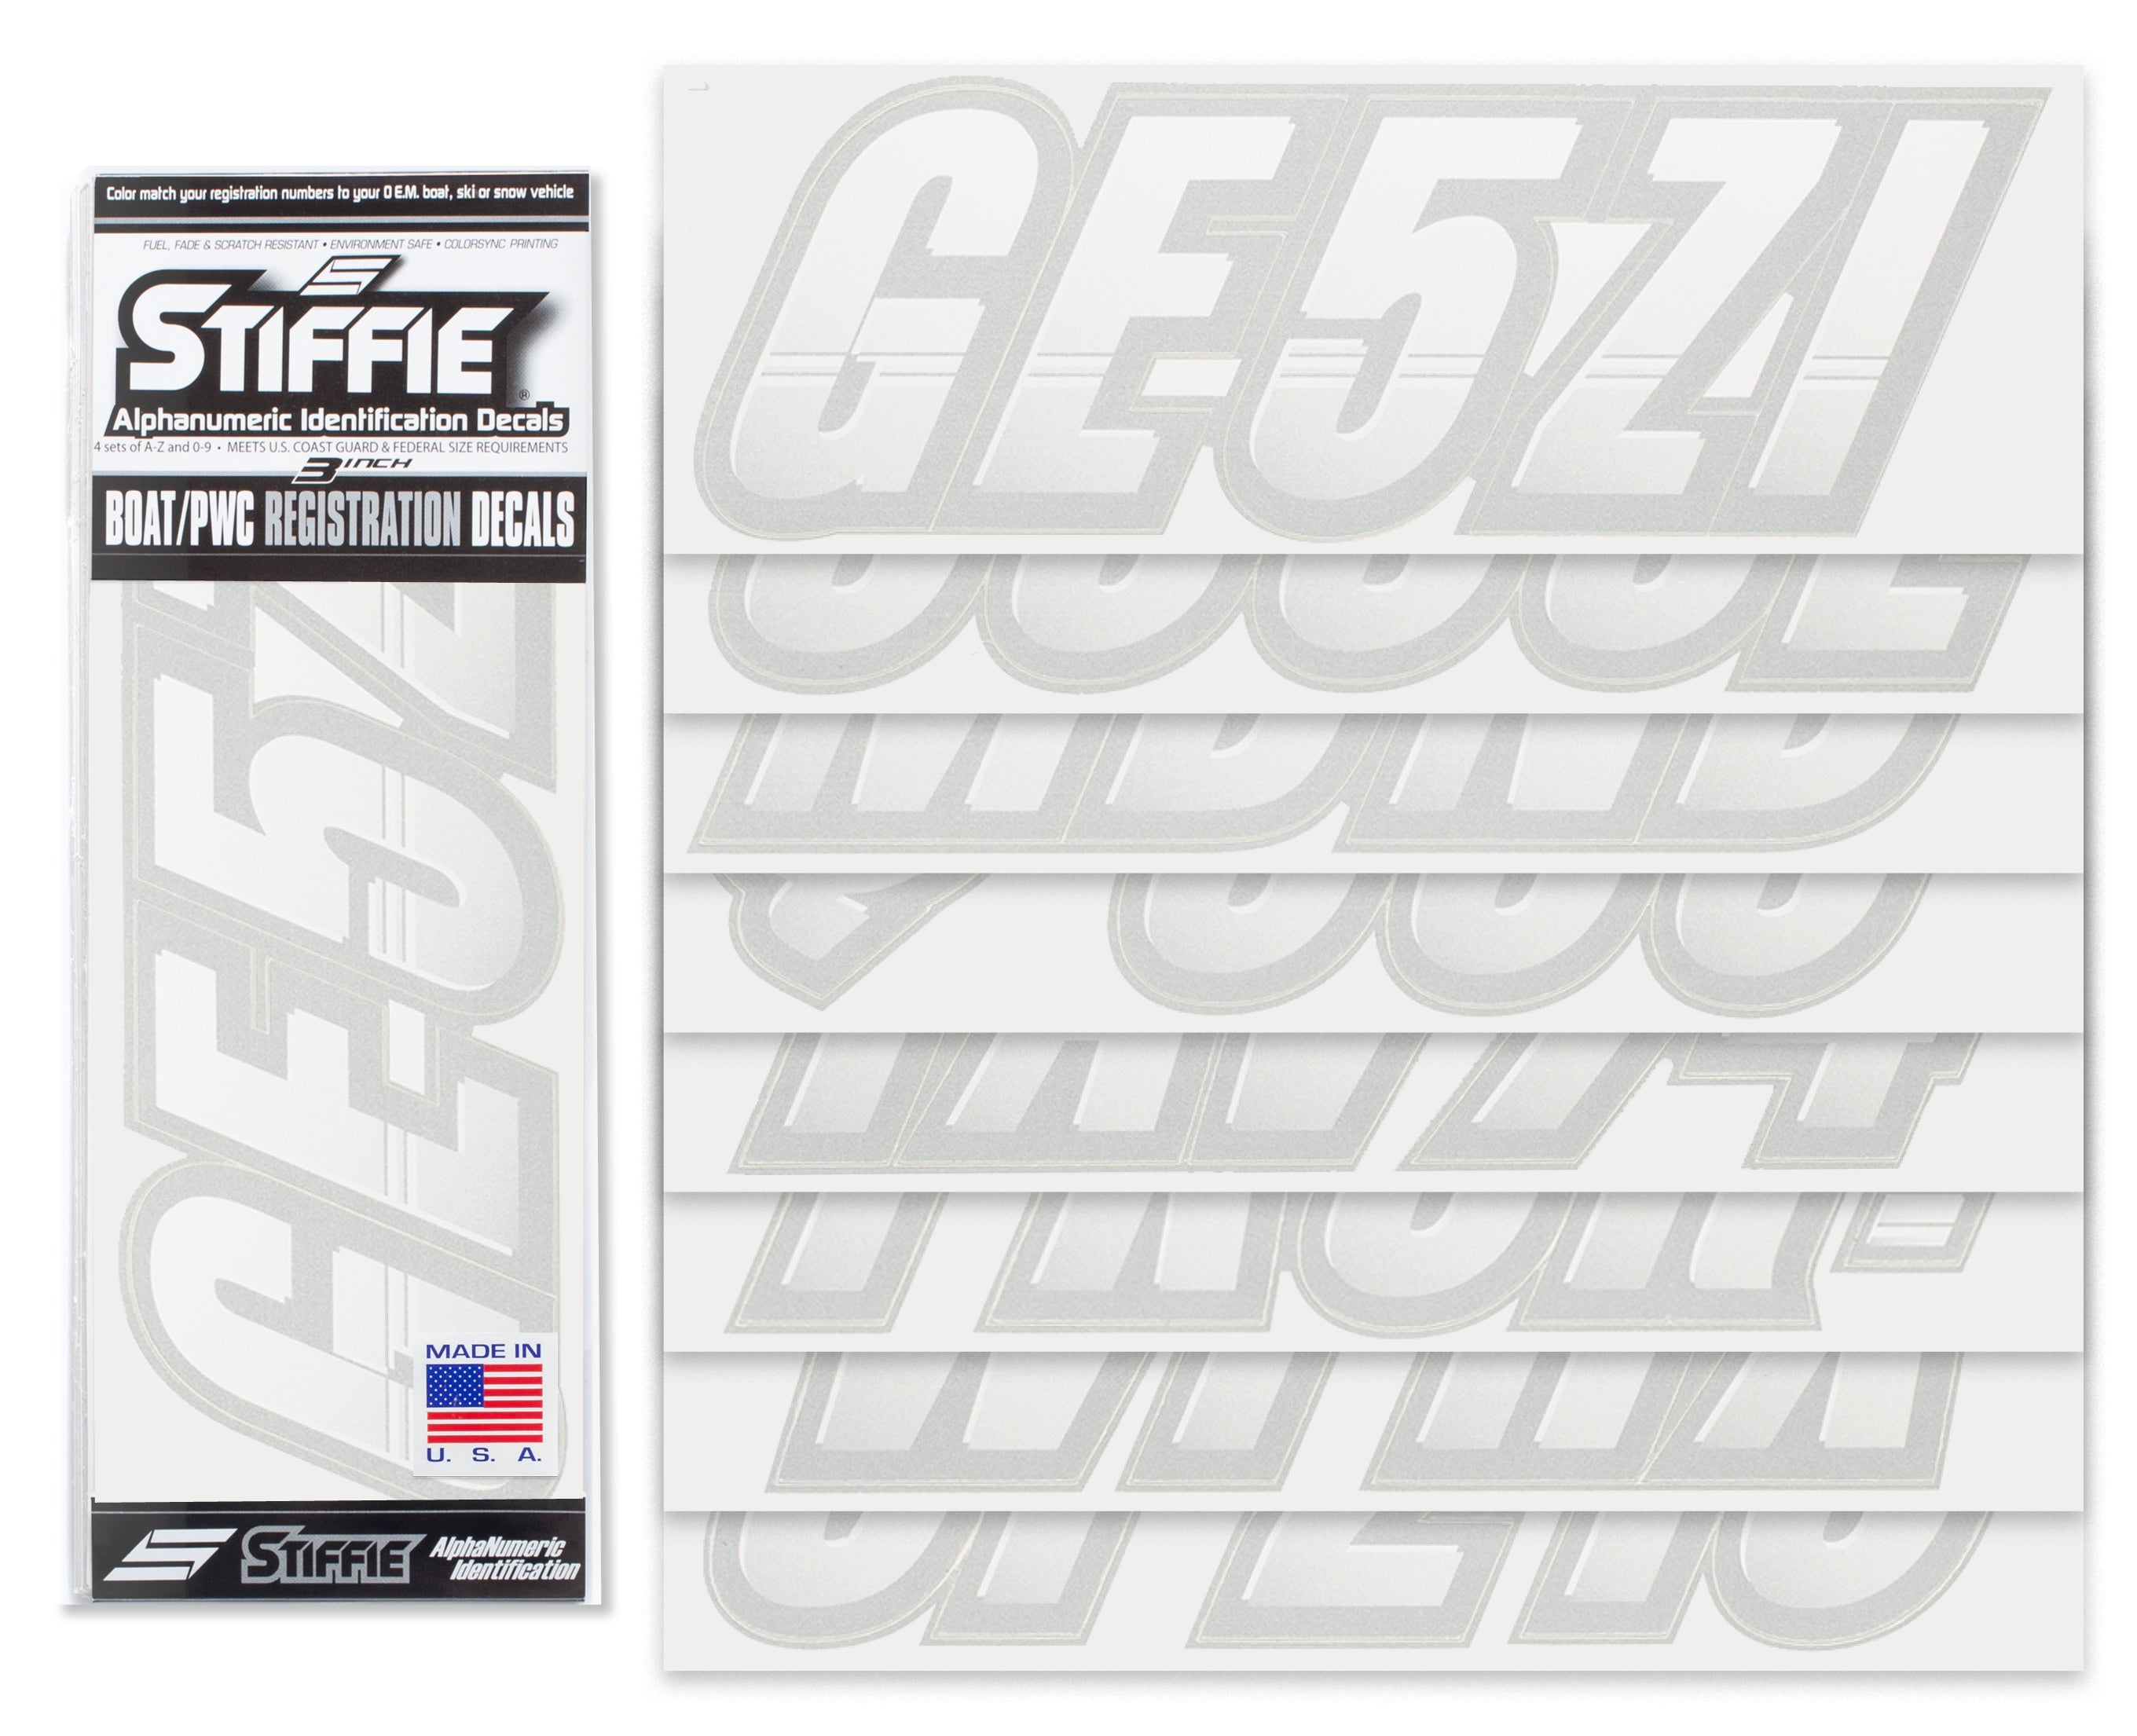 STIFFIE Techtron White/Silver 3" Alpha-Numeric Registration Identification Numbers Stickers Decals for Boats & Personal Watercraft